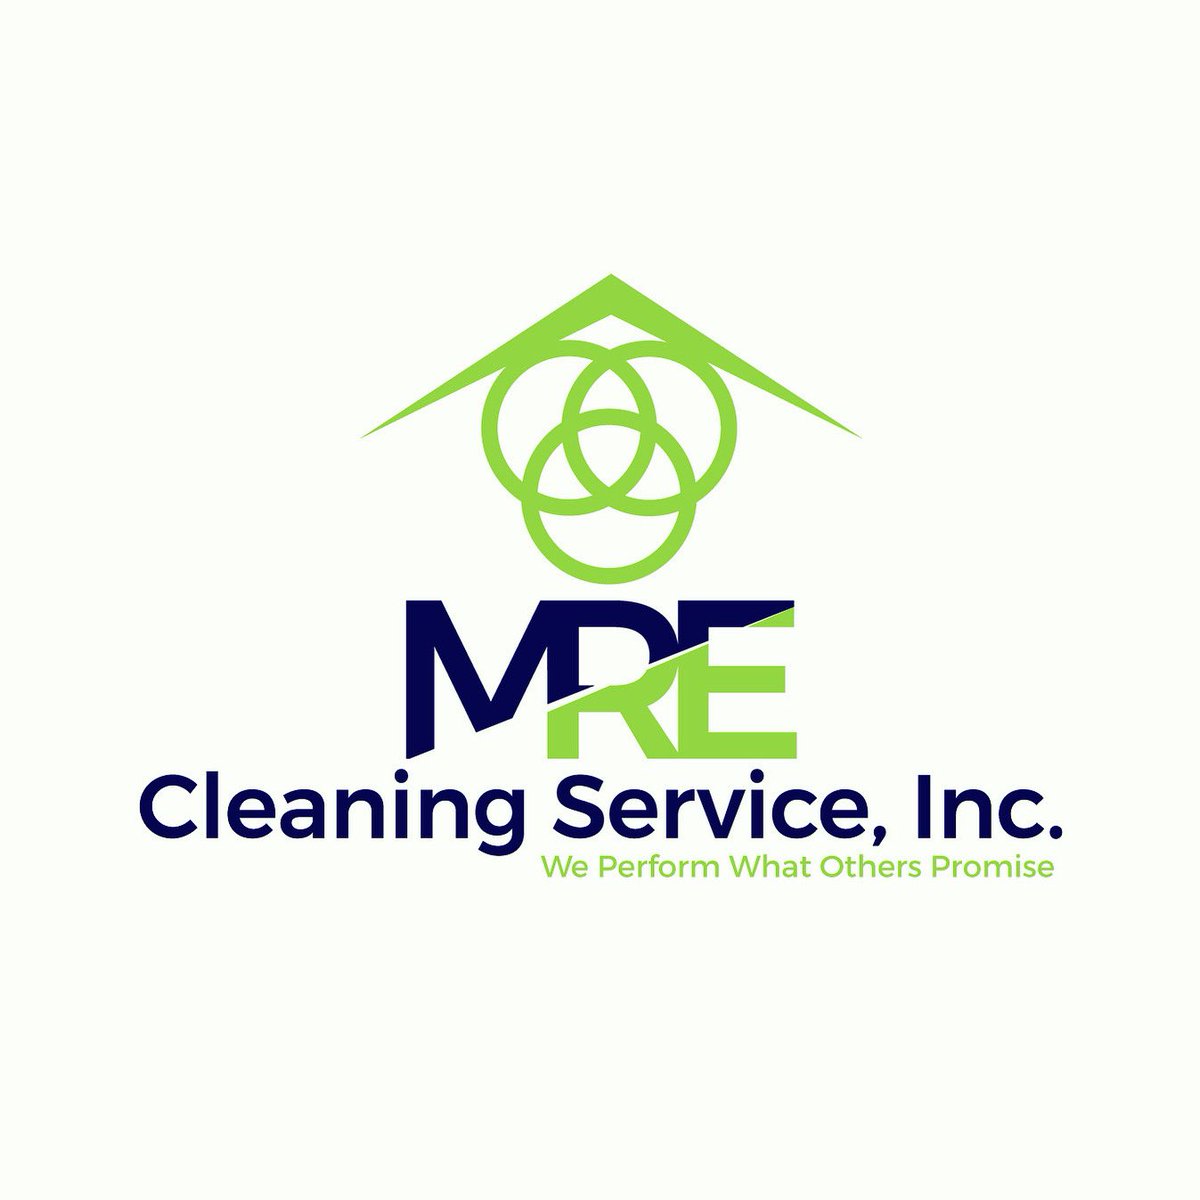 Revitalize your workspace with M.R.E. Cleaning Service, Inc.! 🌟 Specializing in commercial cleaning, we'll ensure your office shines bright. Book today for a spotless tomorrow! ✨ #CommercialCleaning #OfficeMaintenance #BookNow